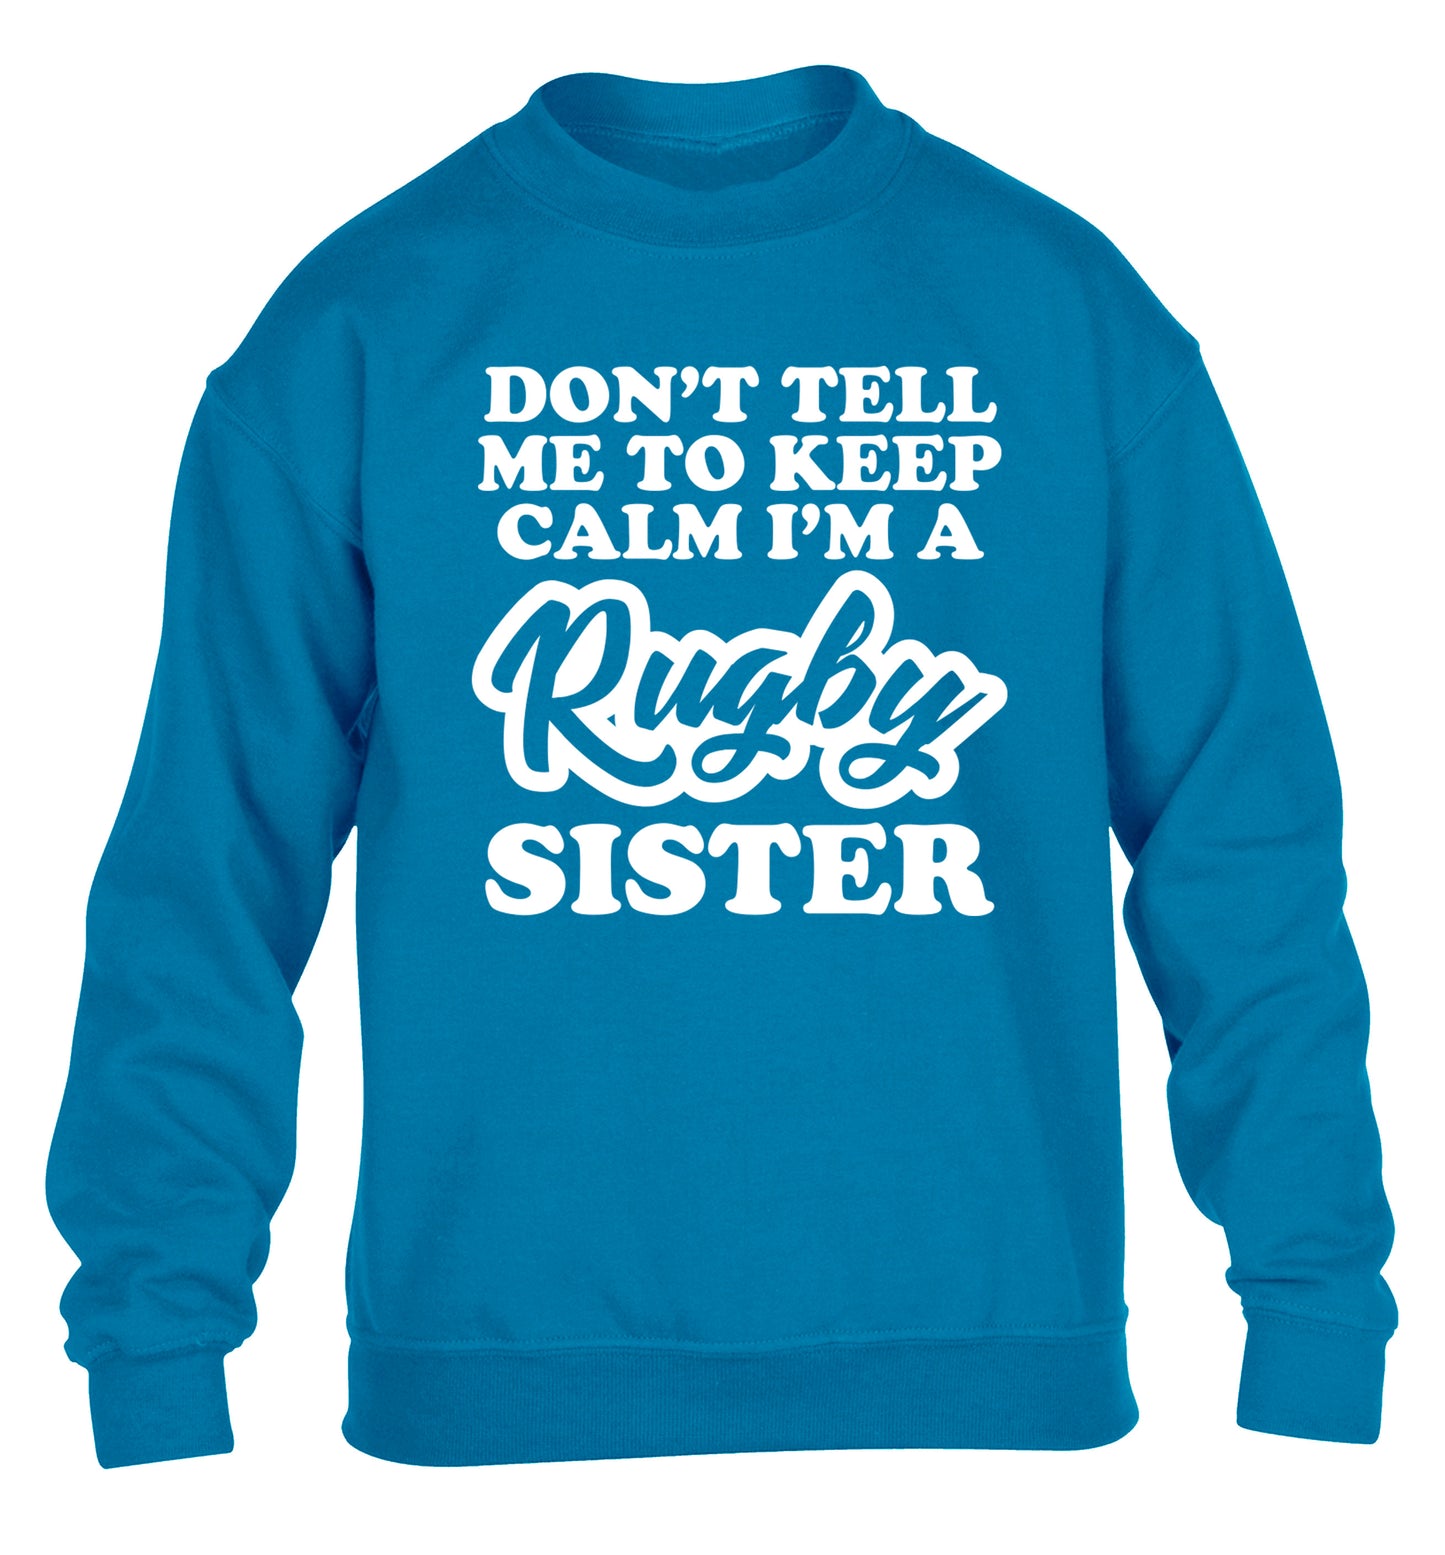 Don't tell me keep calm I'm a rugby sister children's blue sweater 12-13 Years